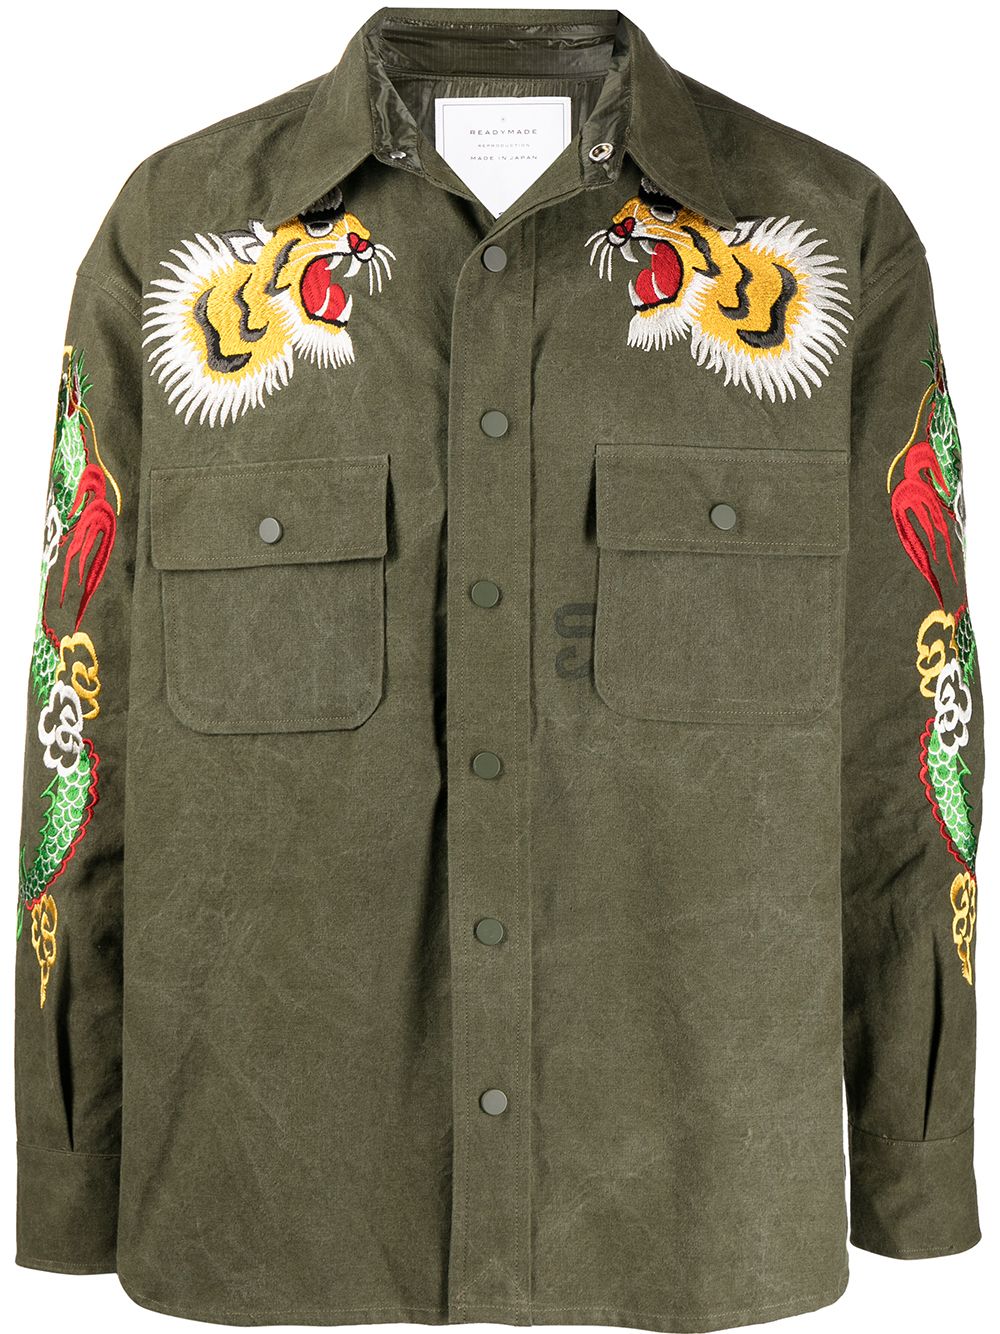 Readymade embroidered shirt jacket - Green von Readymade